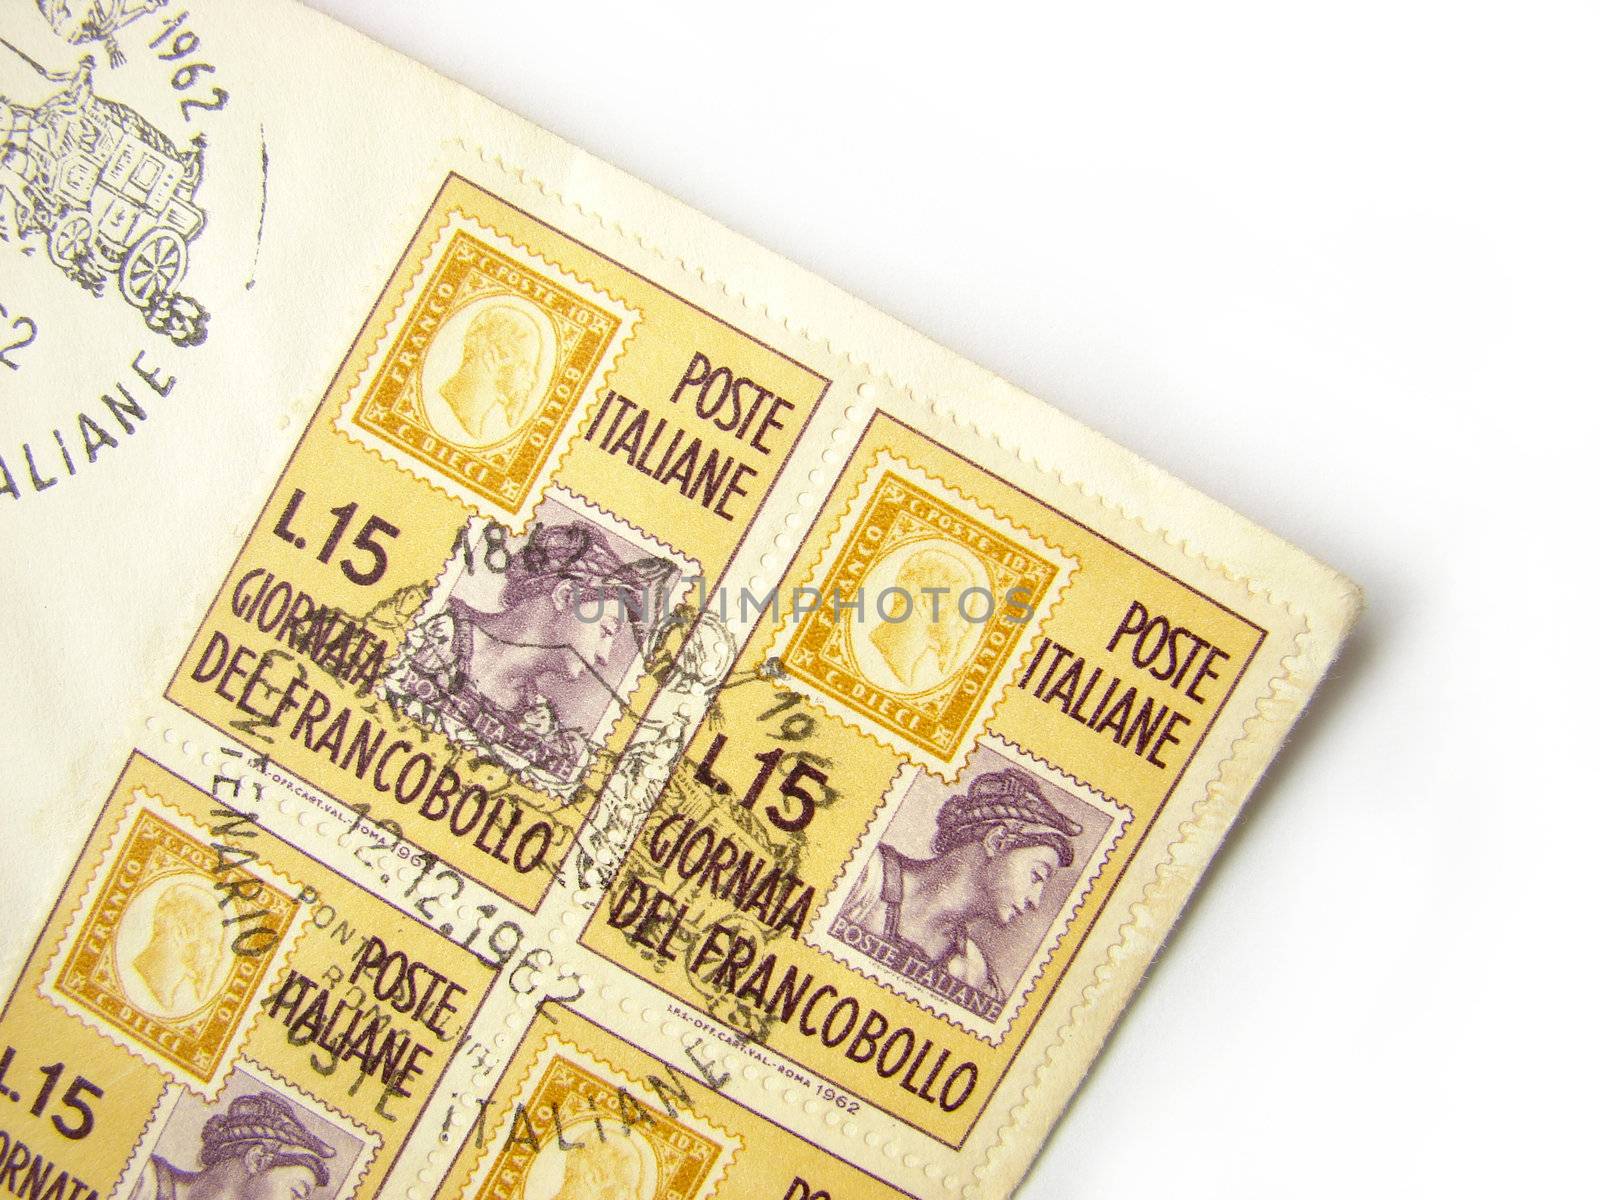 Italy postage stamps on envelope, on white background